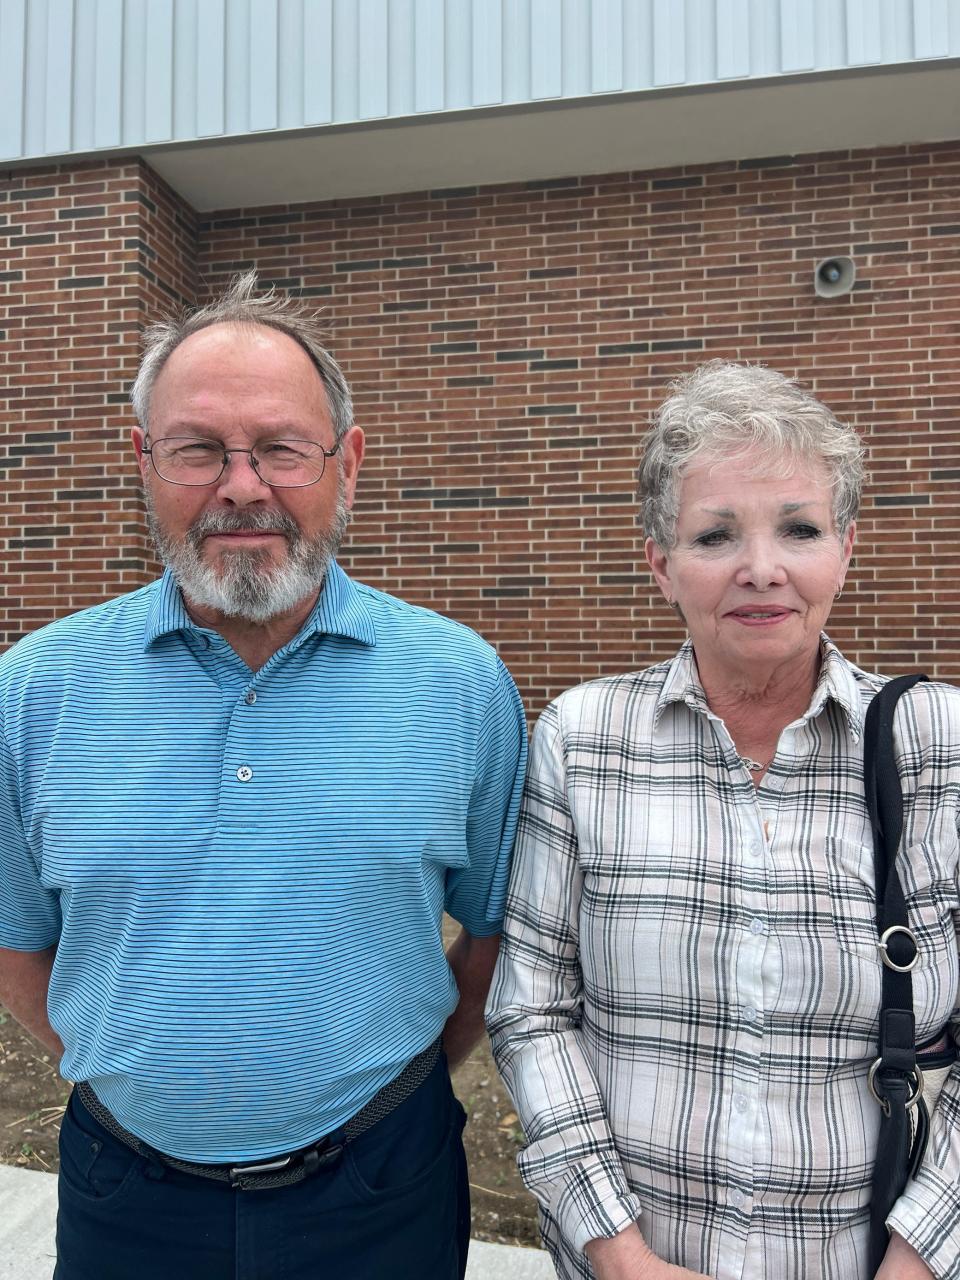 Jim and Jan Fuquay said they wanted to see candidates focus more on education.